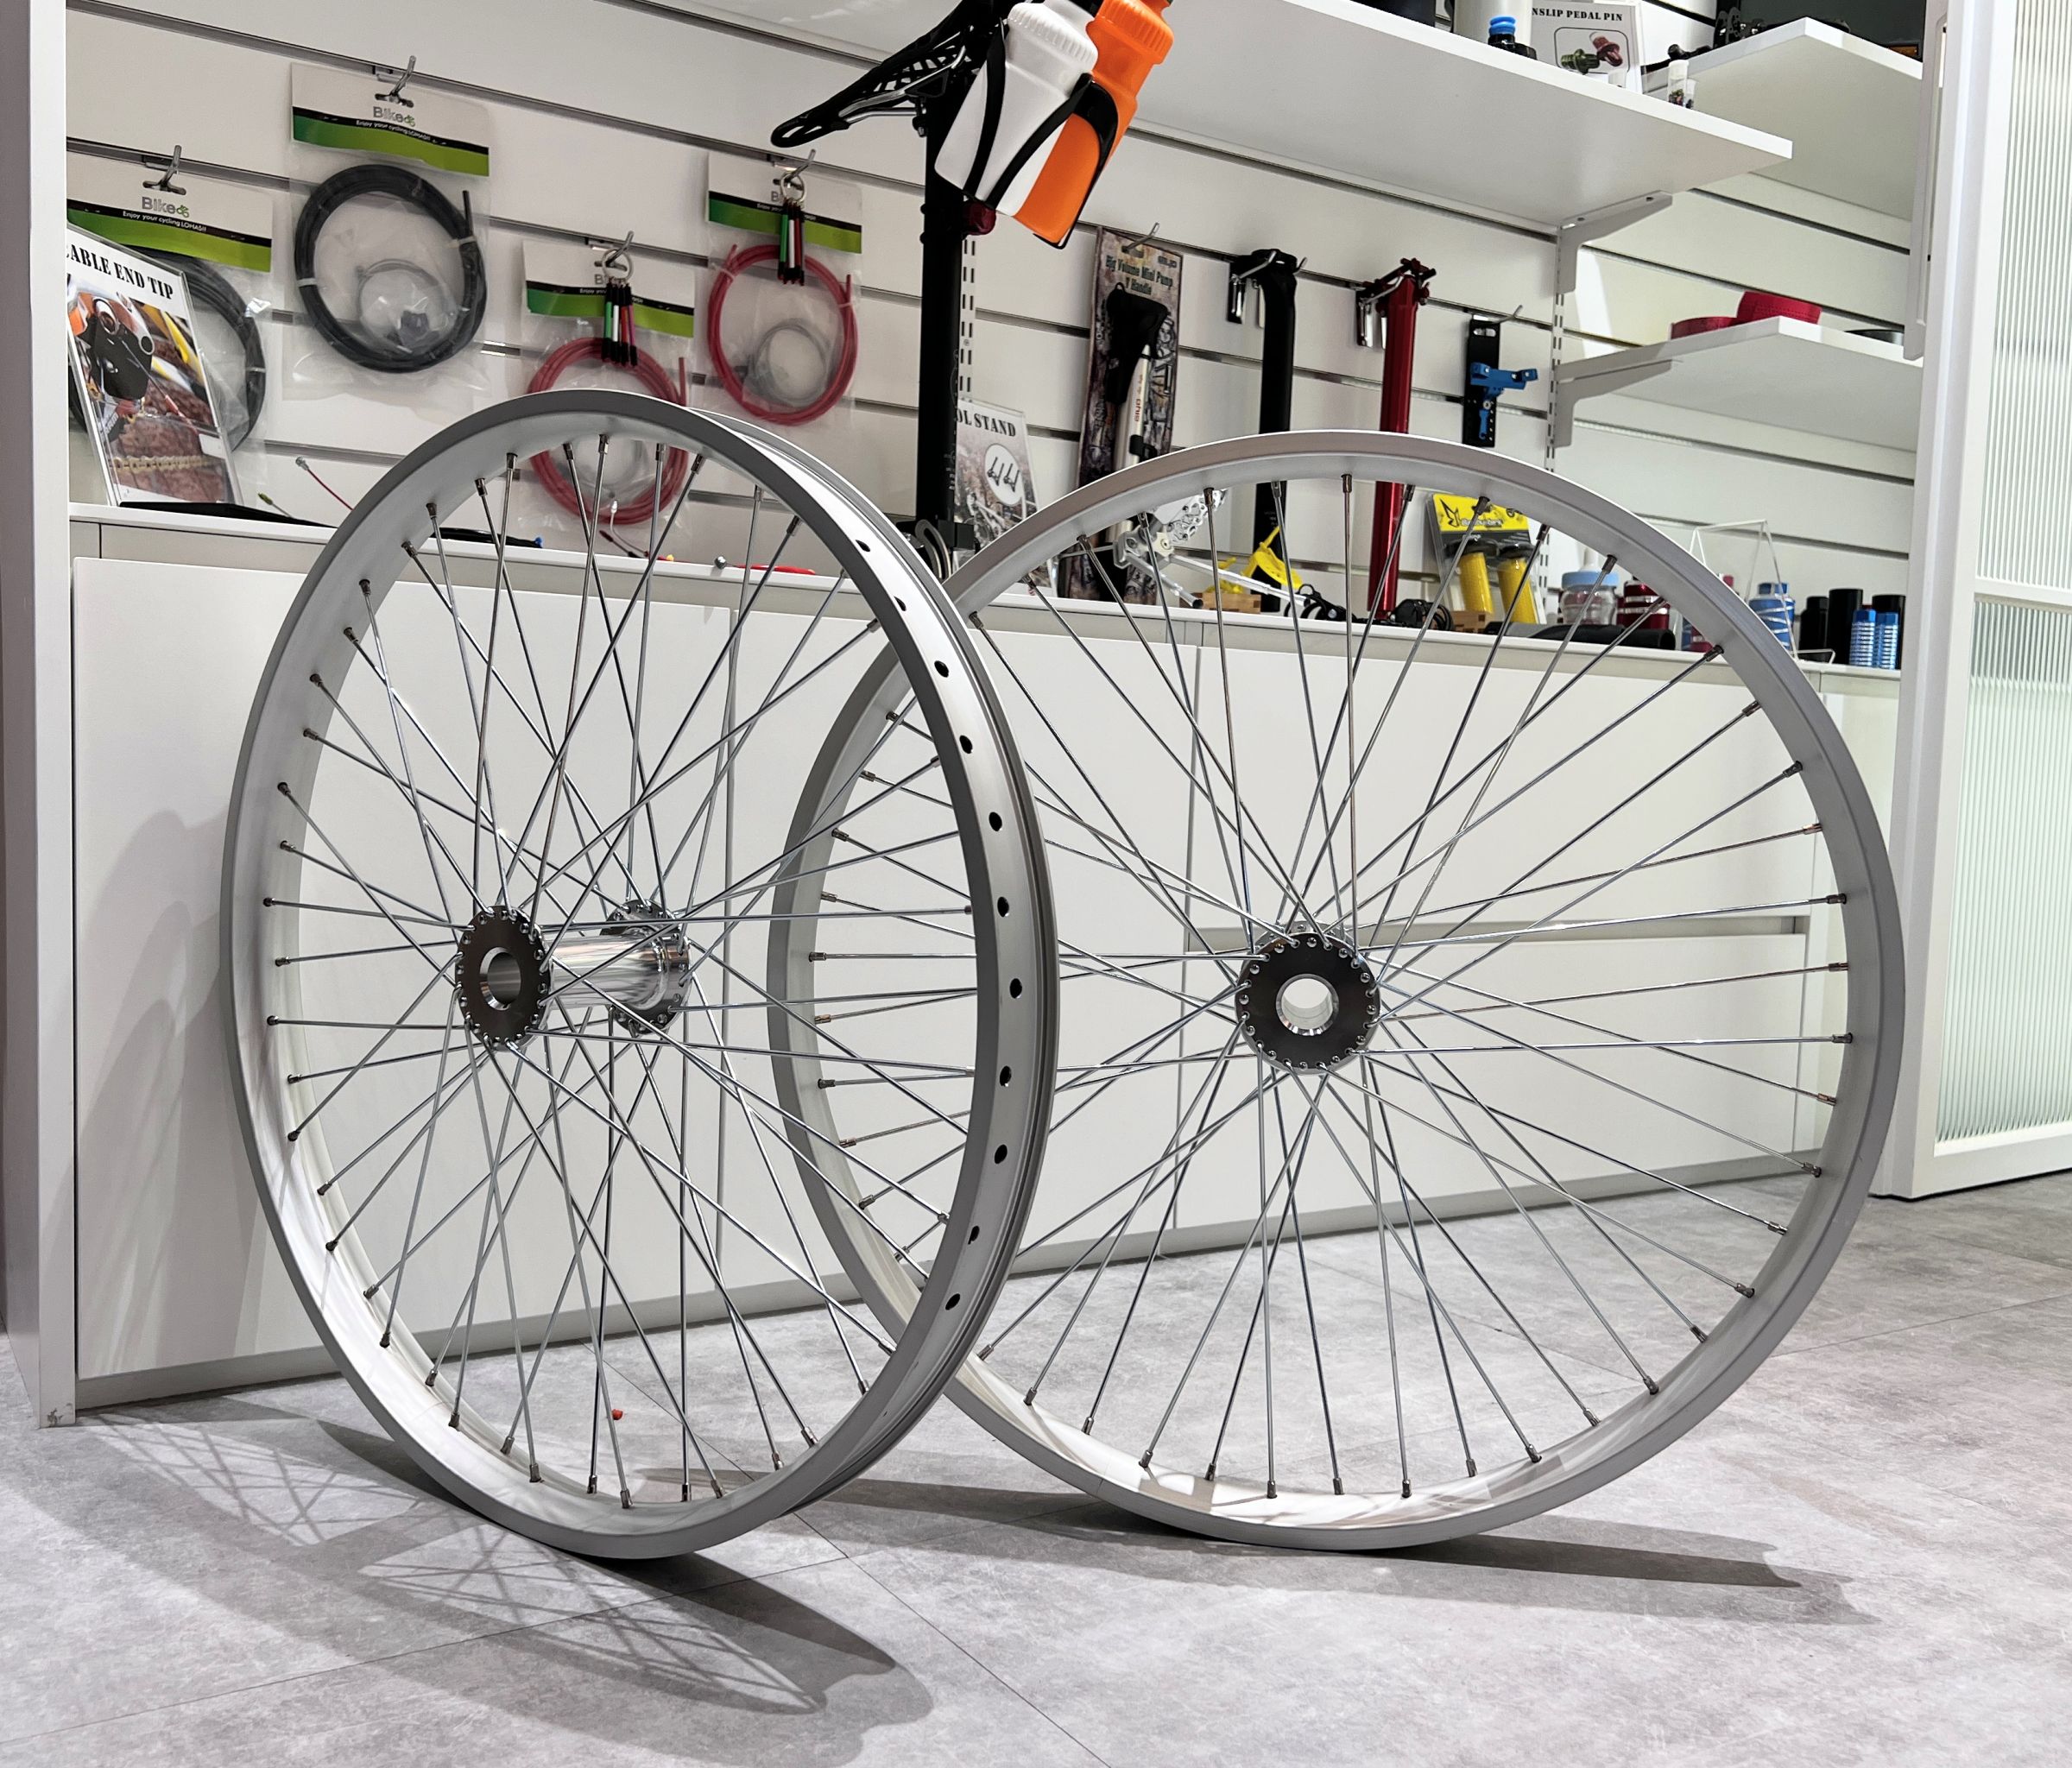 Bicycle wheelset manufacturing and assembling service